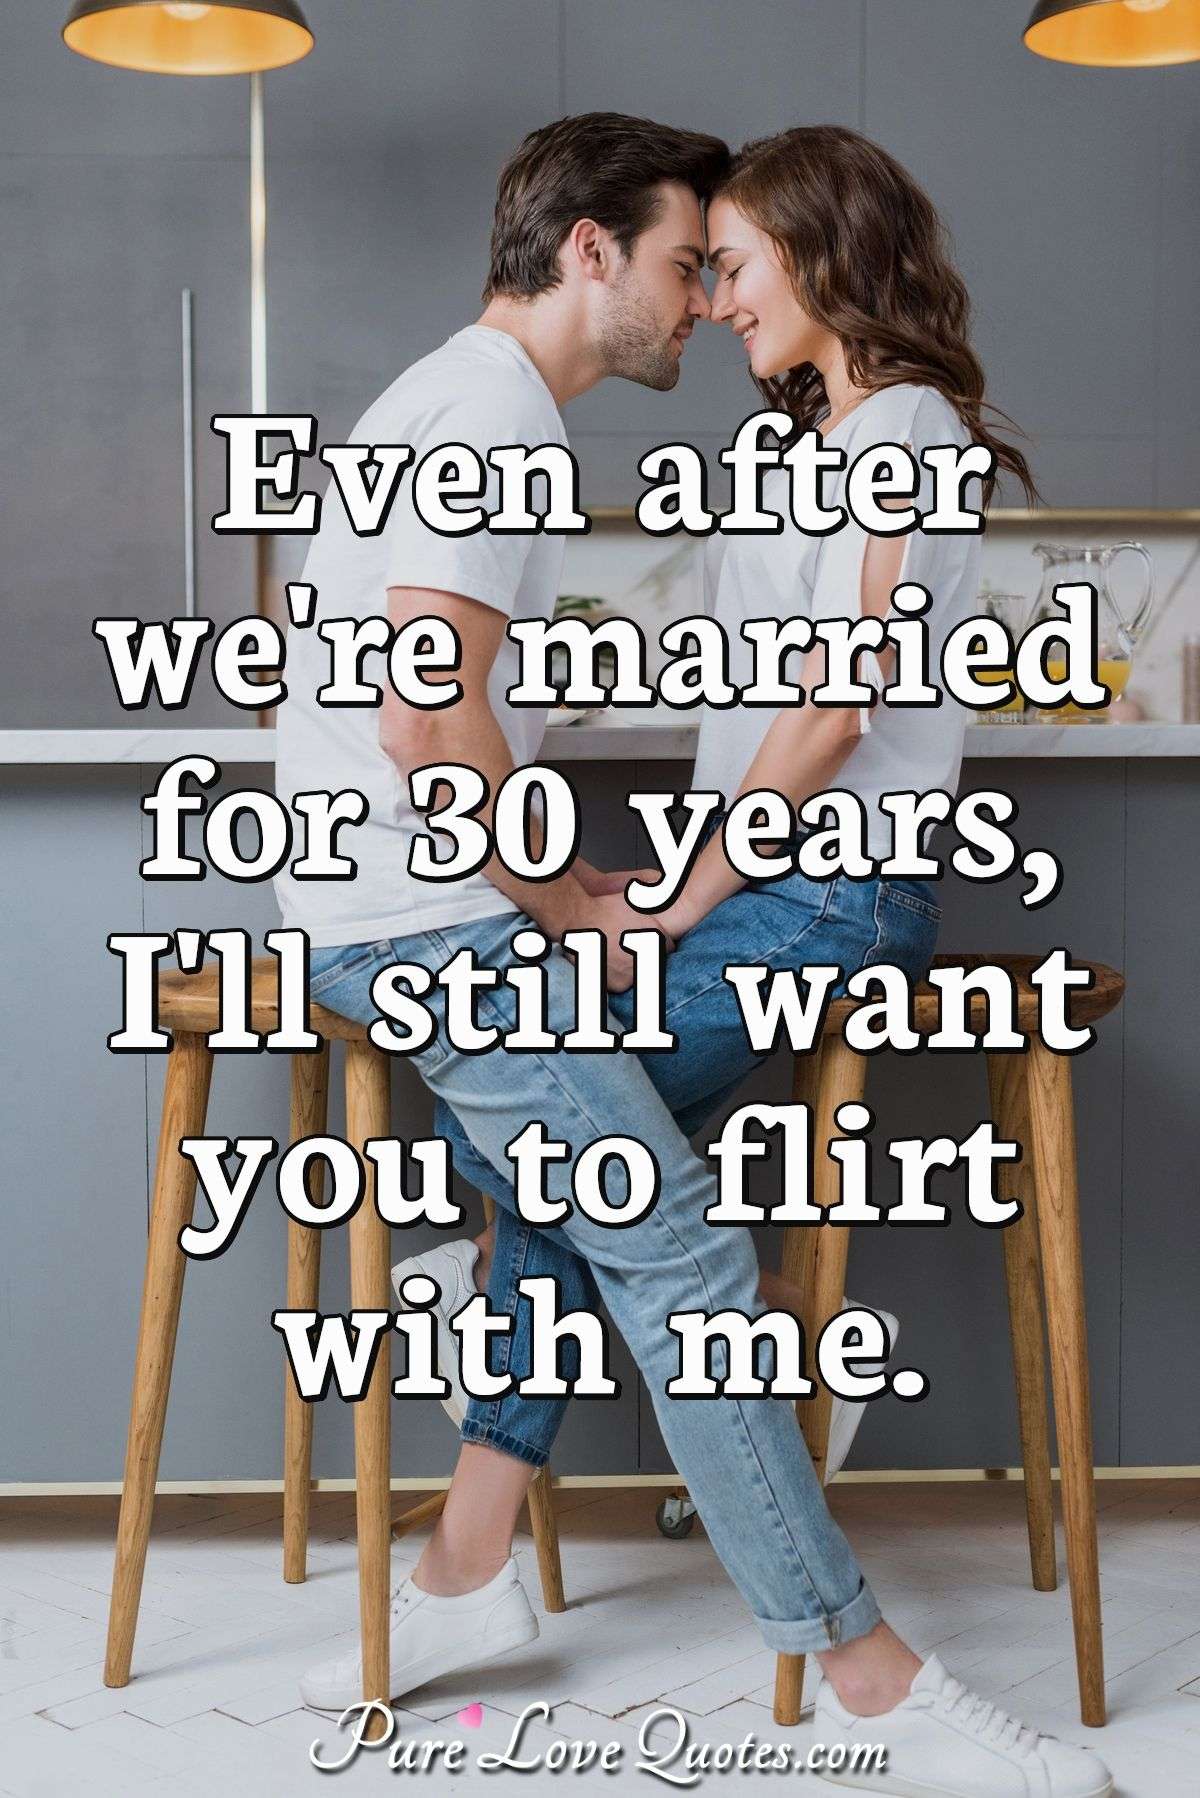 Even after we're married for 30 years, I'll still want you to flirt with me. - Anonymous